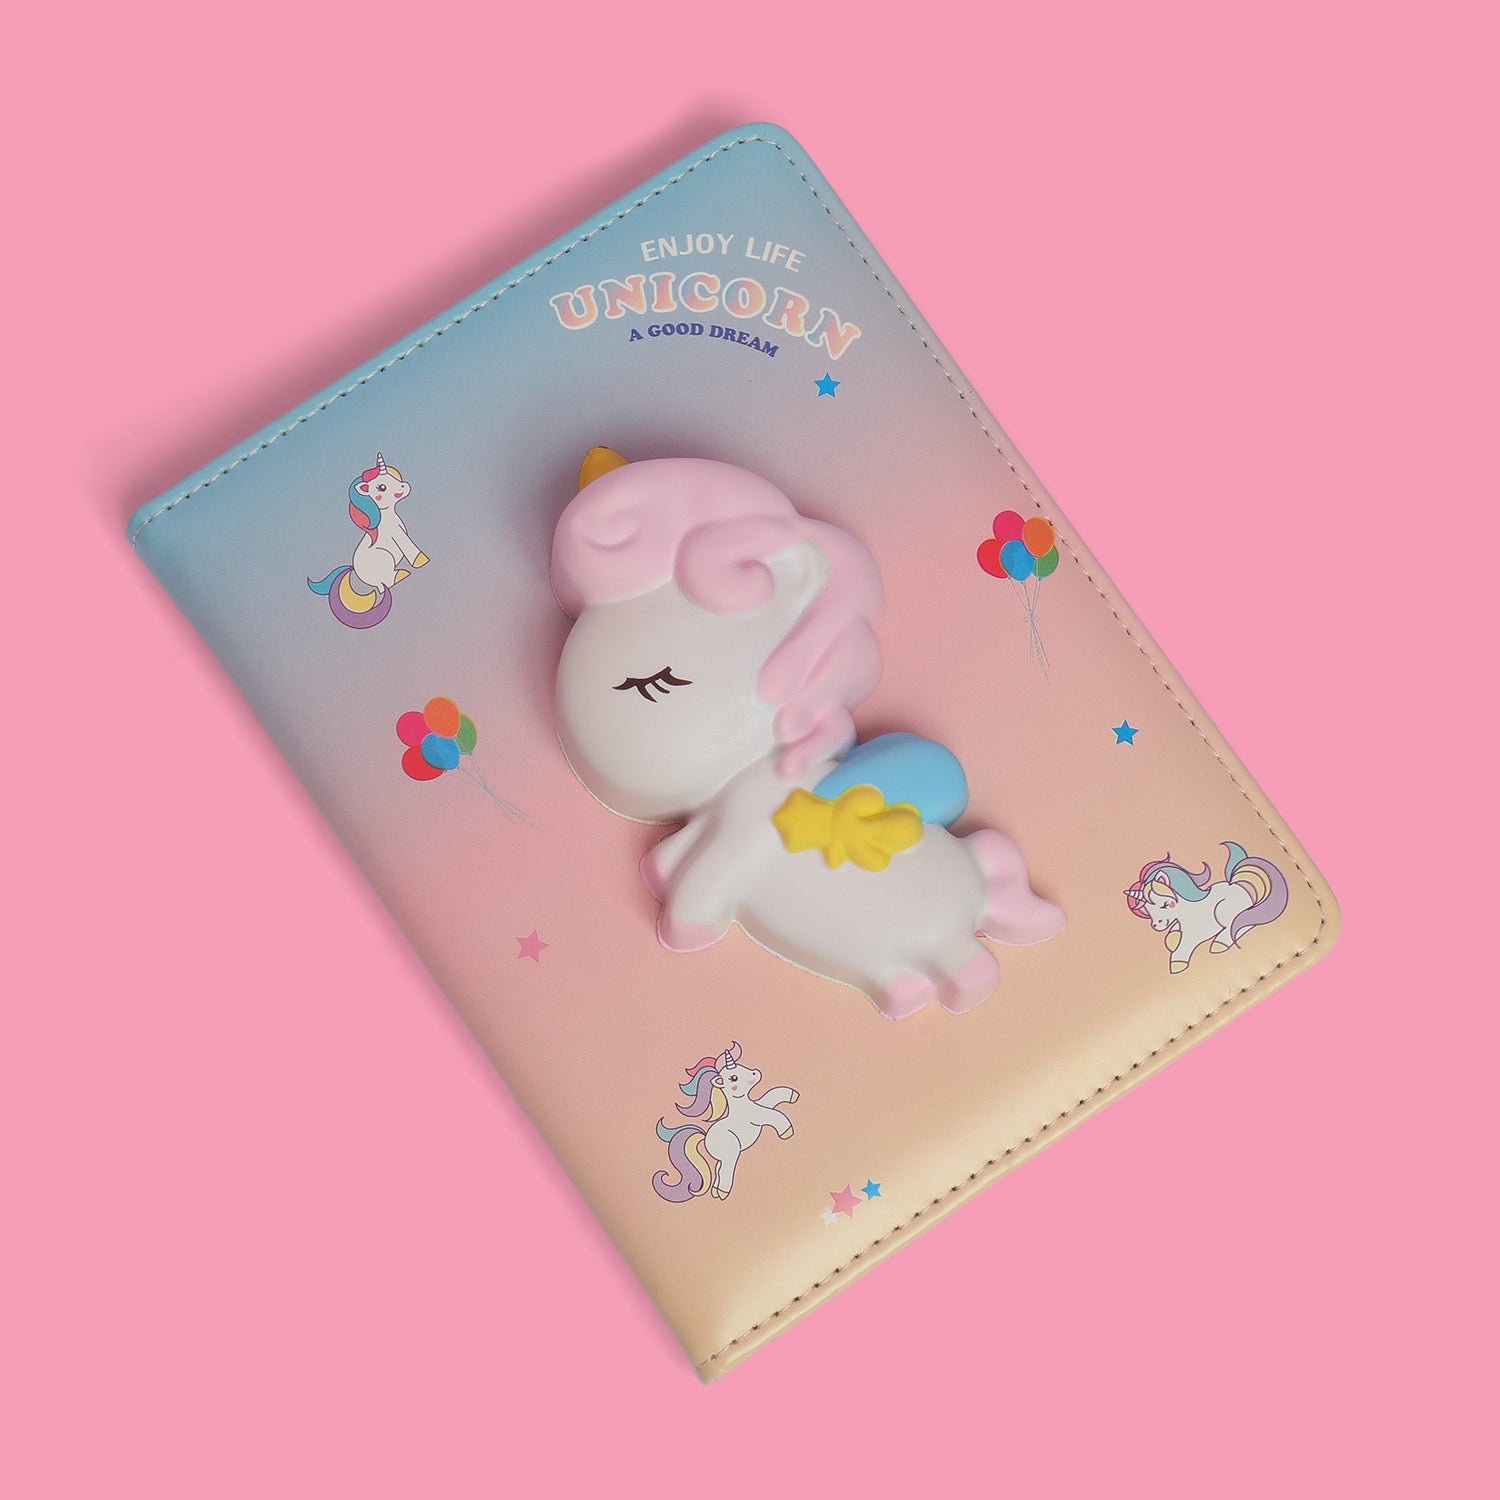 Cute 3D Squishy Unicorn Themed Fancy Notebook with printed pages for your tots